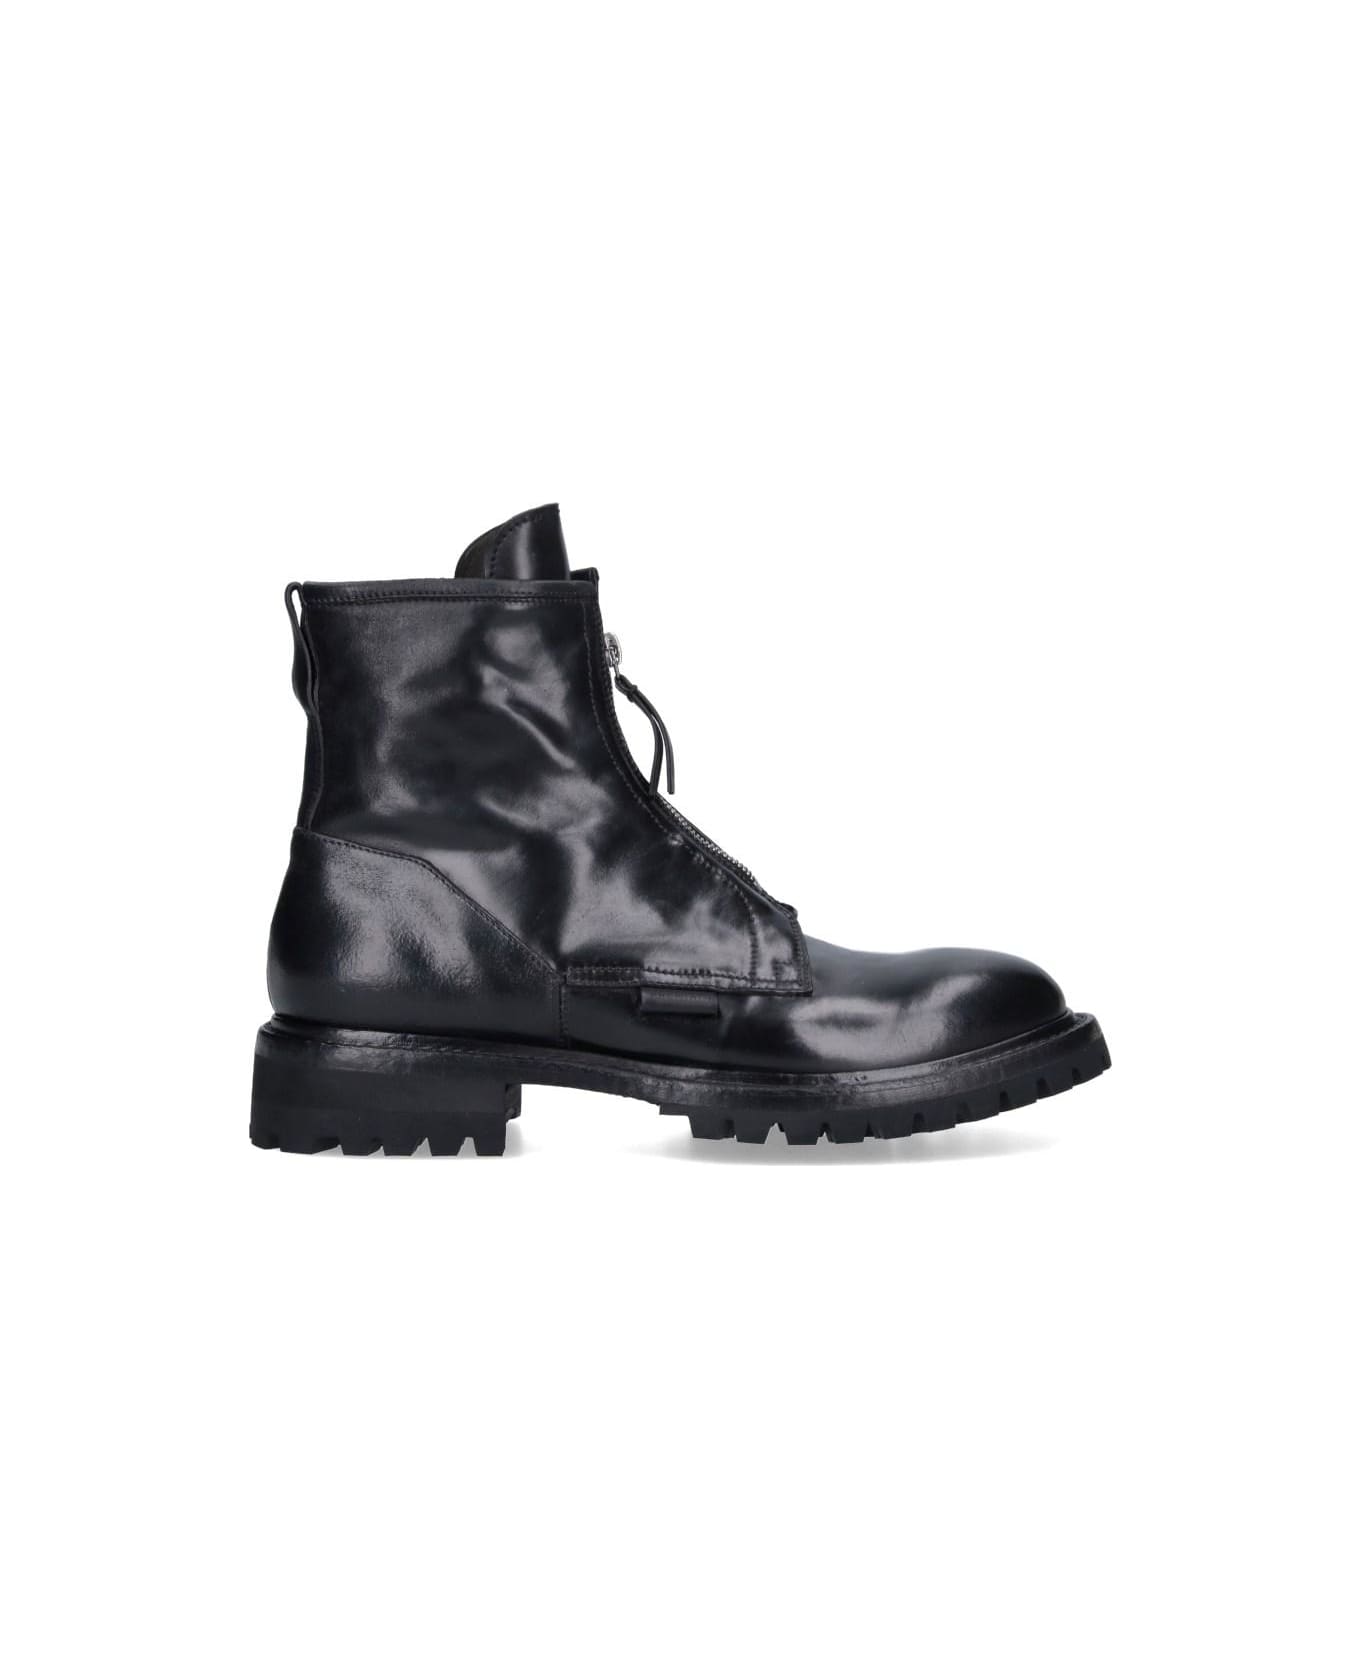 Premiata Leather Ankle Boots Boots - BLACK ブーツ